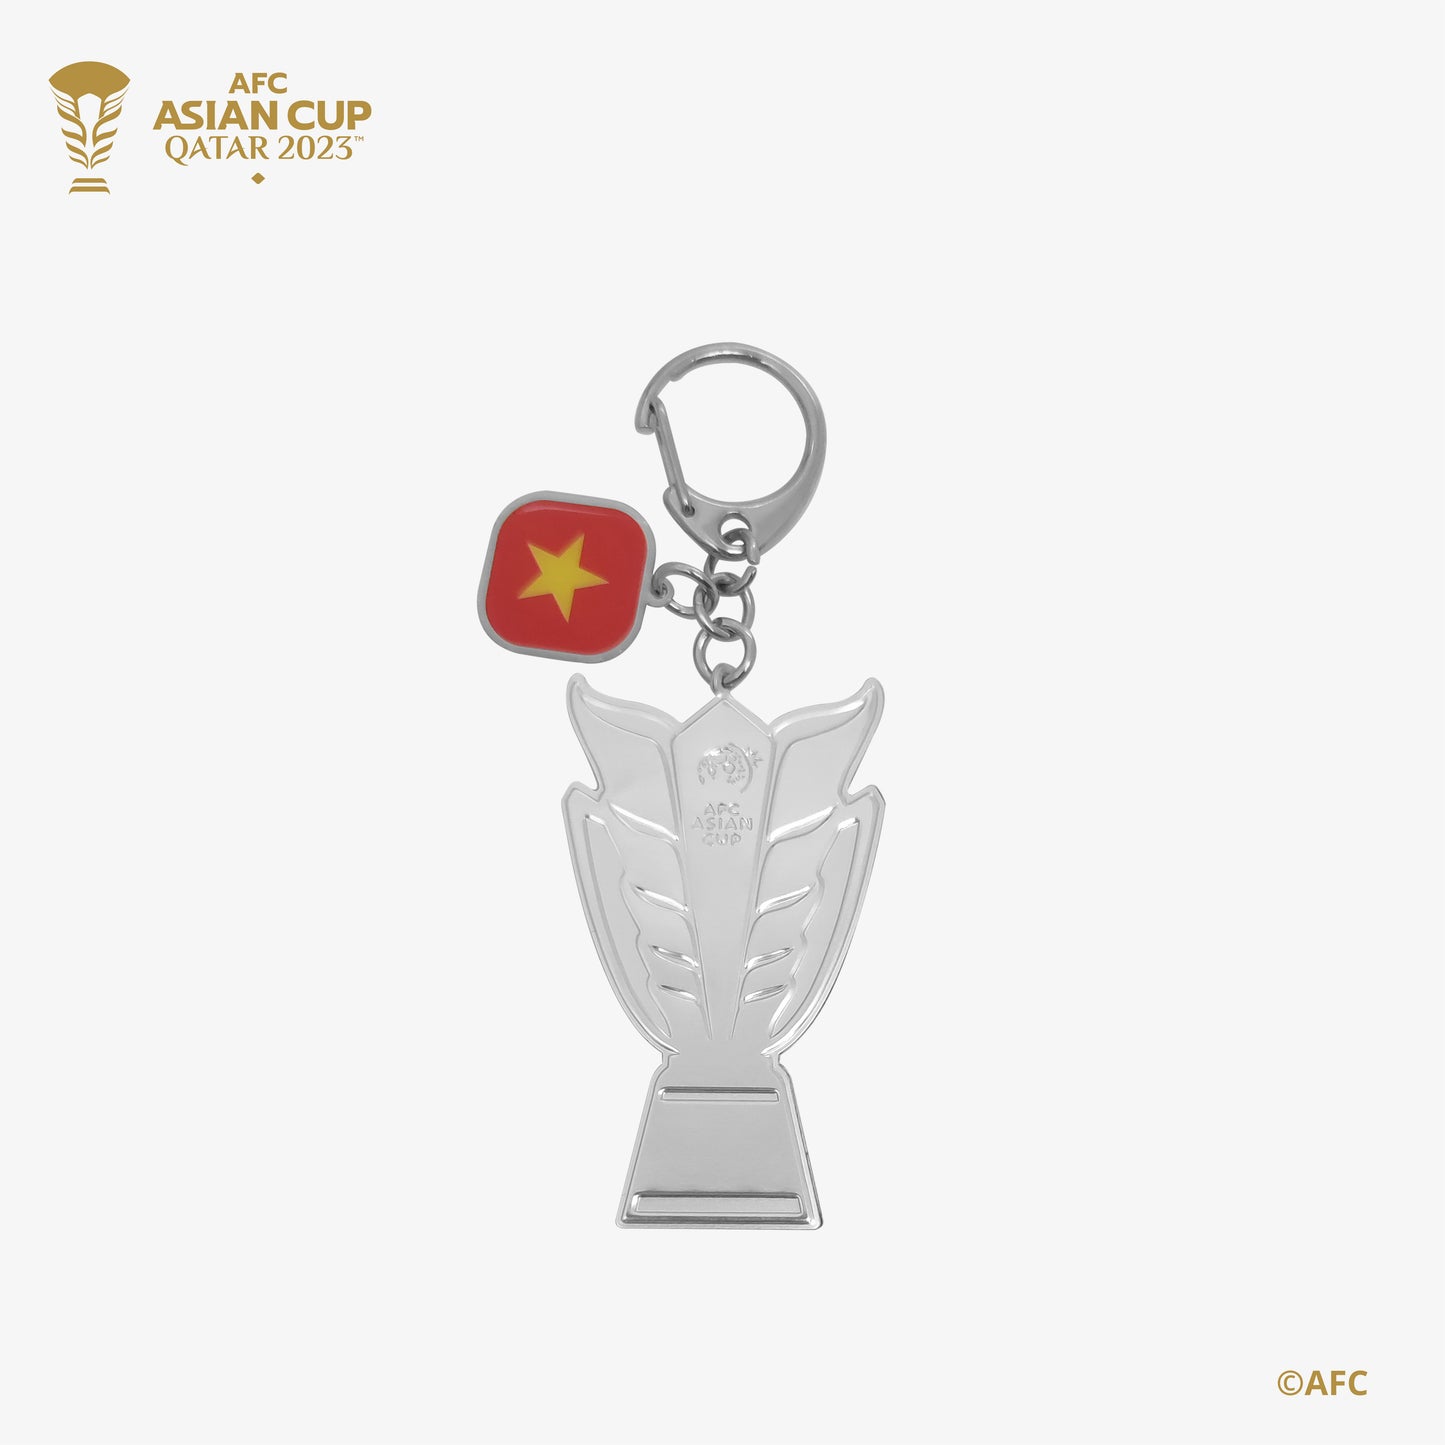 AFC Asian Cup 2D Trophy Keychain with Country Flag - Vietnam